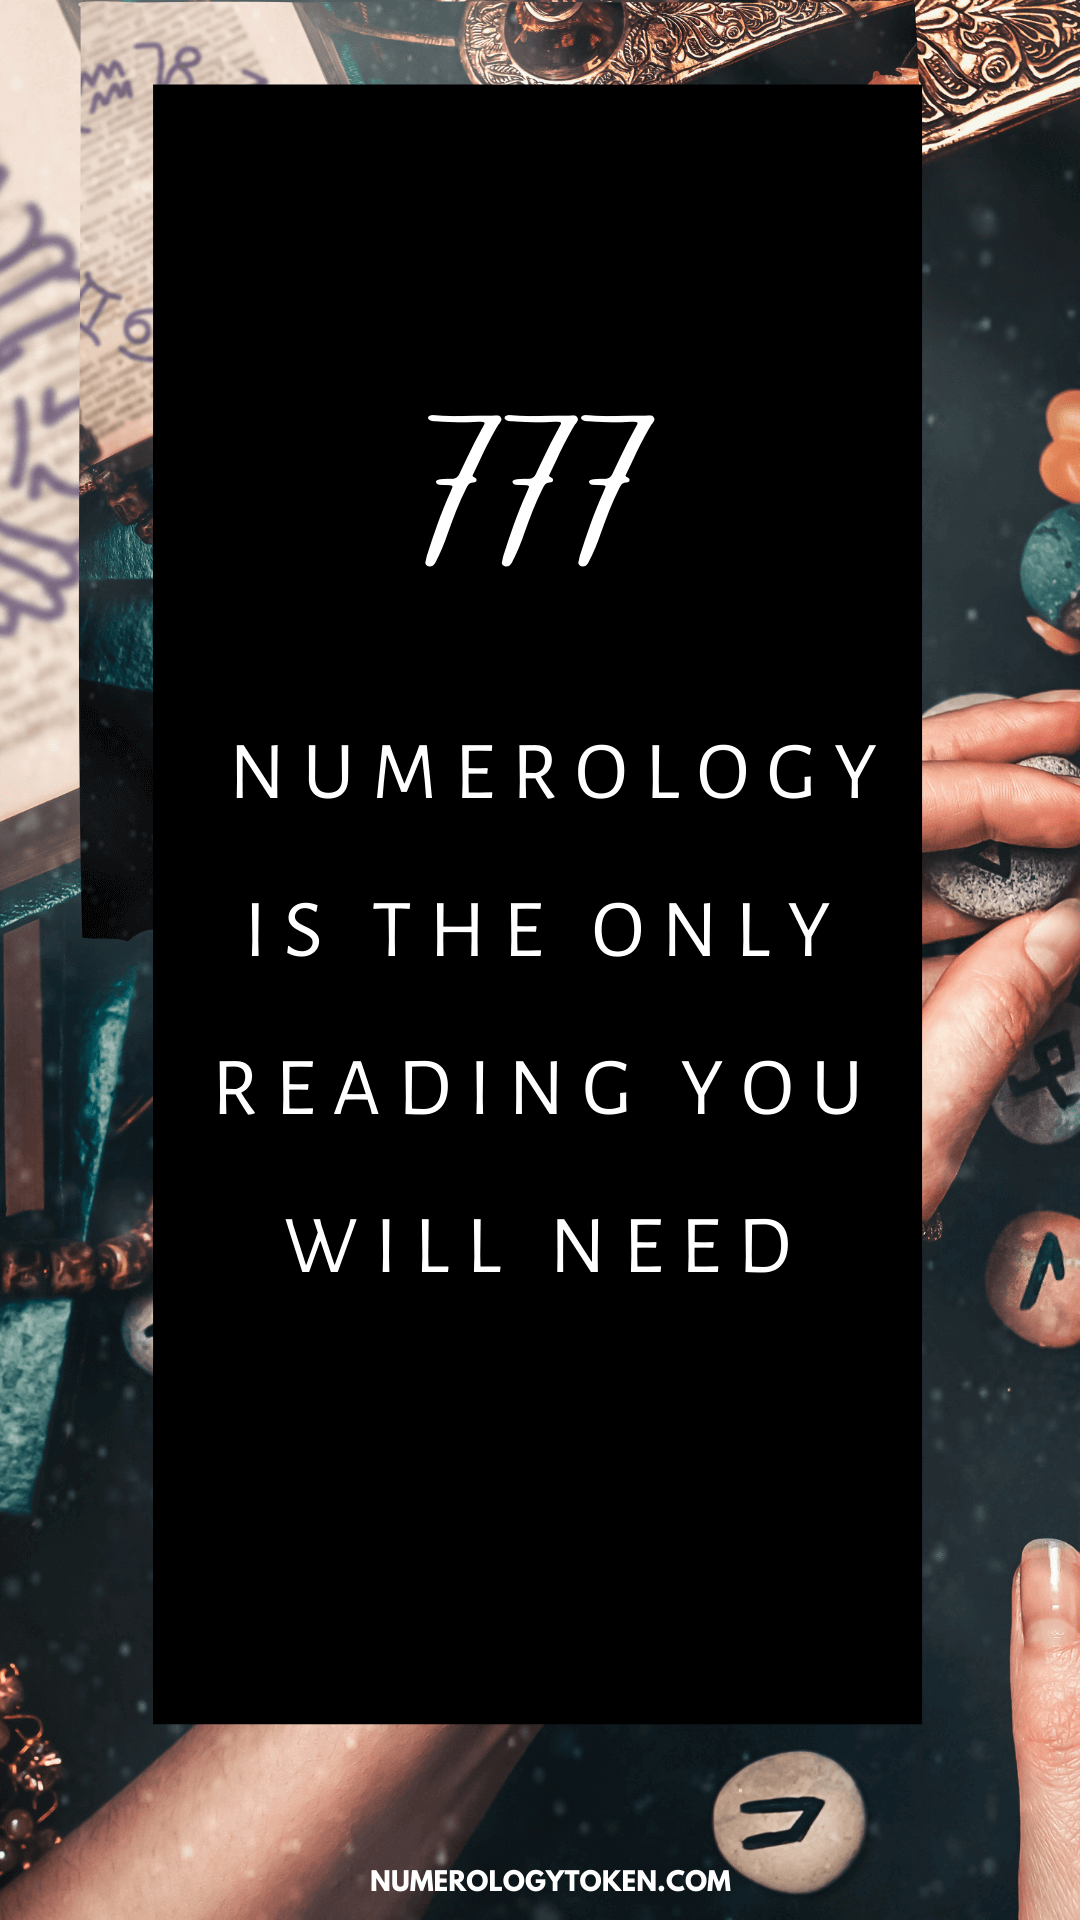 777 Numerology Meaning The Only Reading You Need